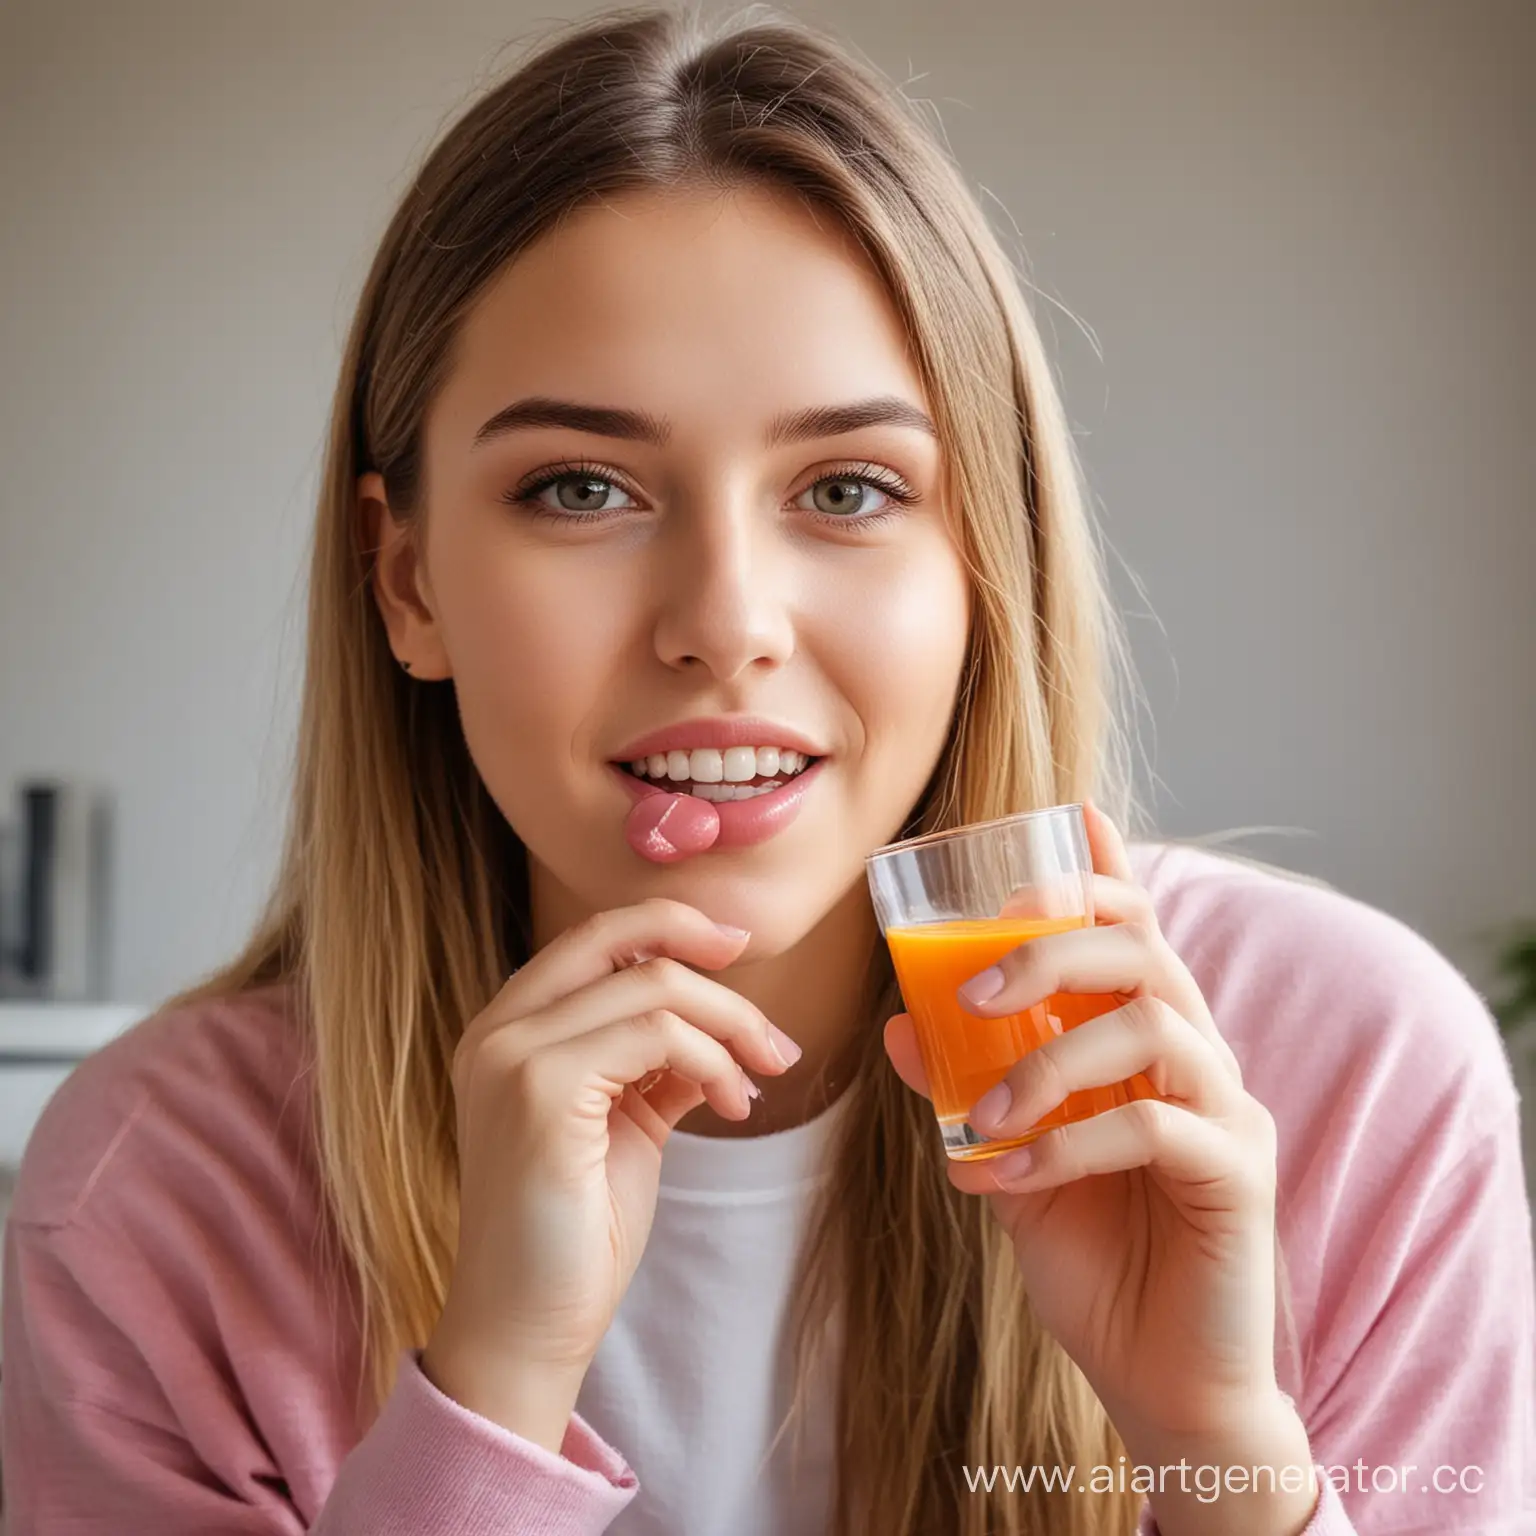 Young-Girl-Enjoying-Multivitamin-Drink-for-Health-and-Wellness